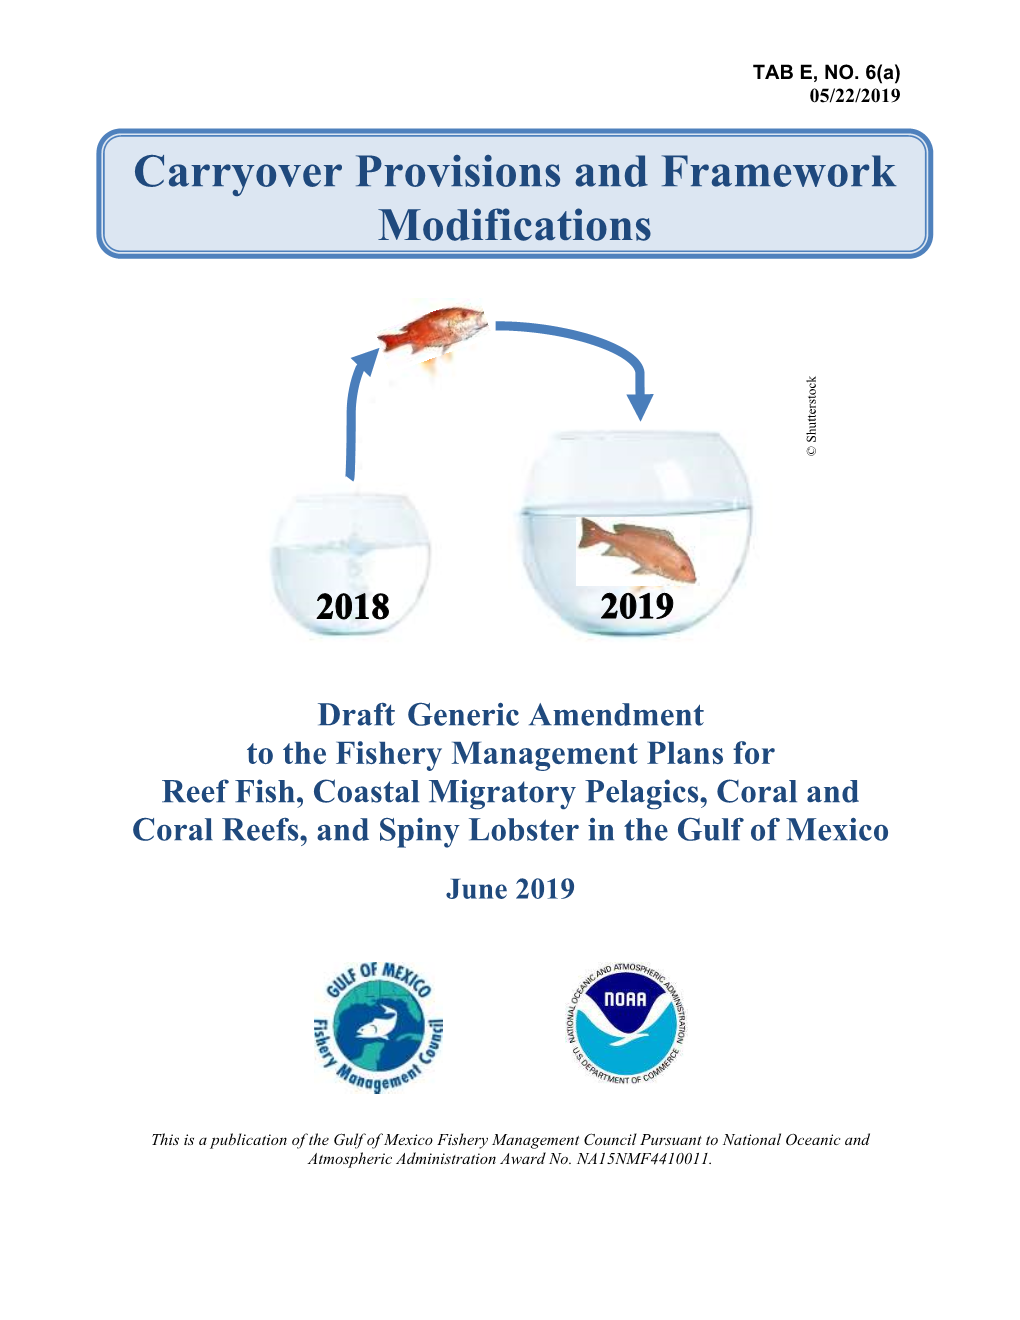 Carryover Provisions and Framework Modifications